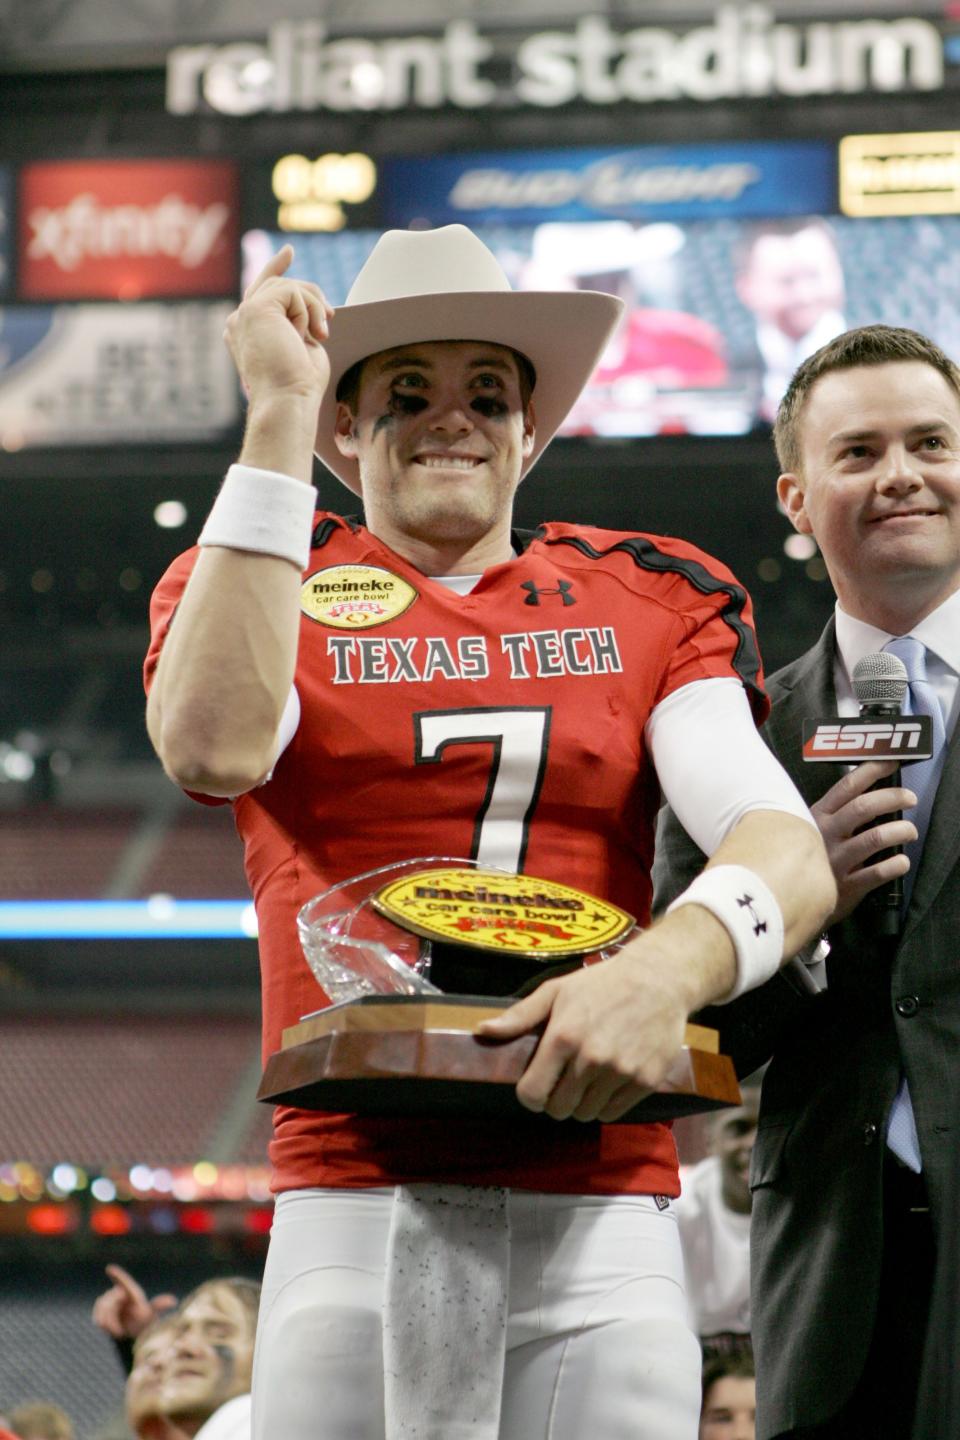 Dec 28, 2012; Houston, TX, USA; Texas Tech Red Raiders quarterback Seth Doege (7) accepts the most valuable player trophy after defeating the Minnesota Gophers in the Meineke Car Care Bowl at Reliant Stadium.  Mandatory Credit: Michael C. Johnson-USA TODAY Sports